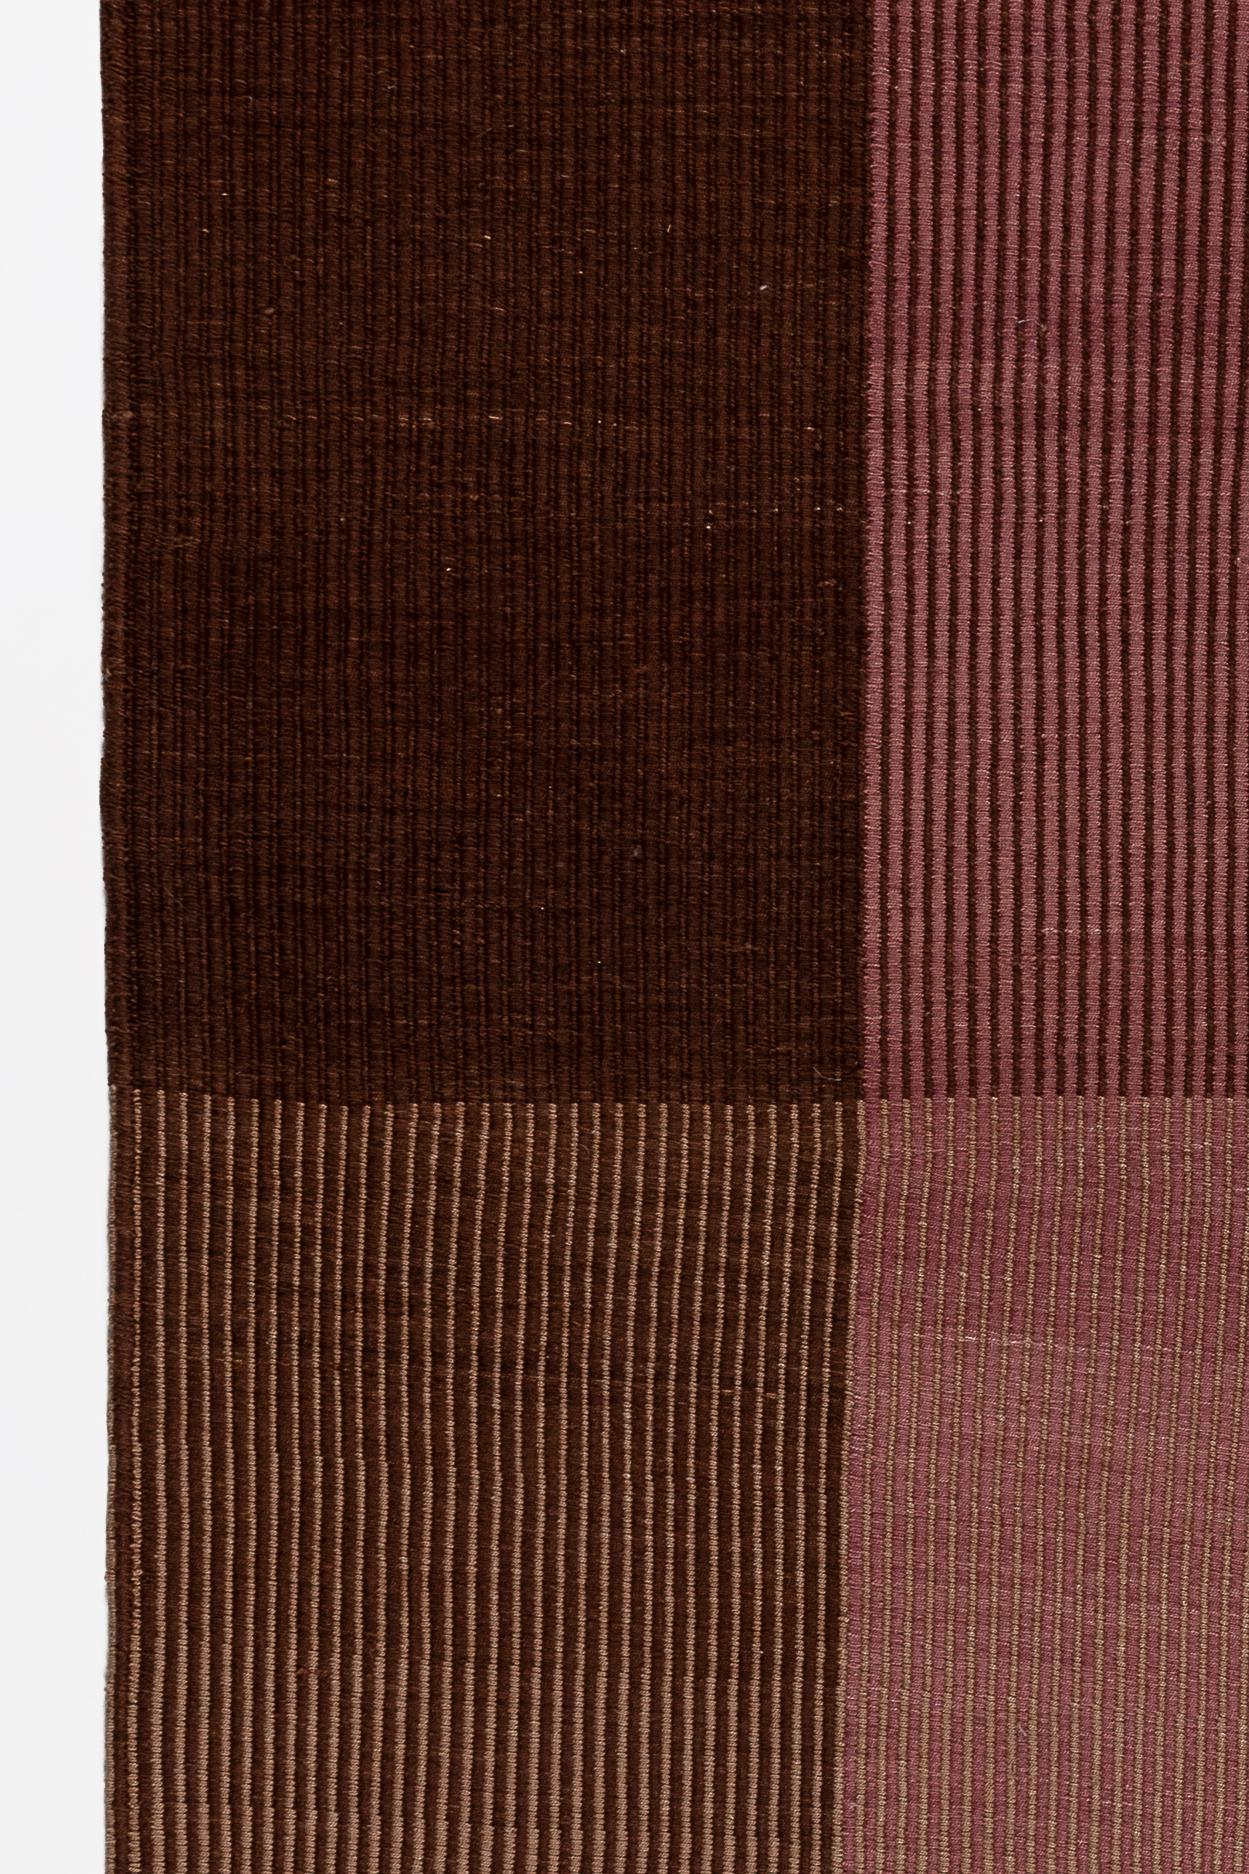 Modern Haze Editions Contemporary Kilim Area Rug Wool Handwoven in Brown and Dusty Rose